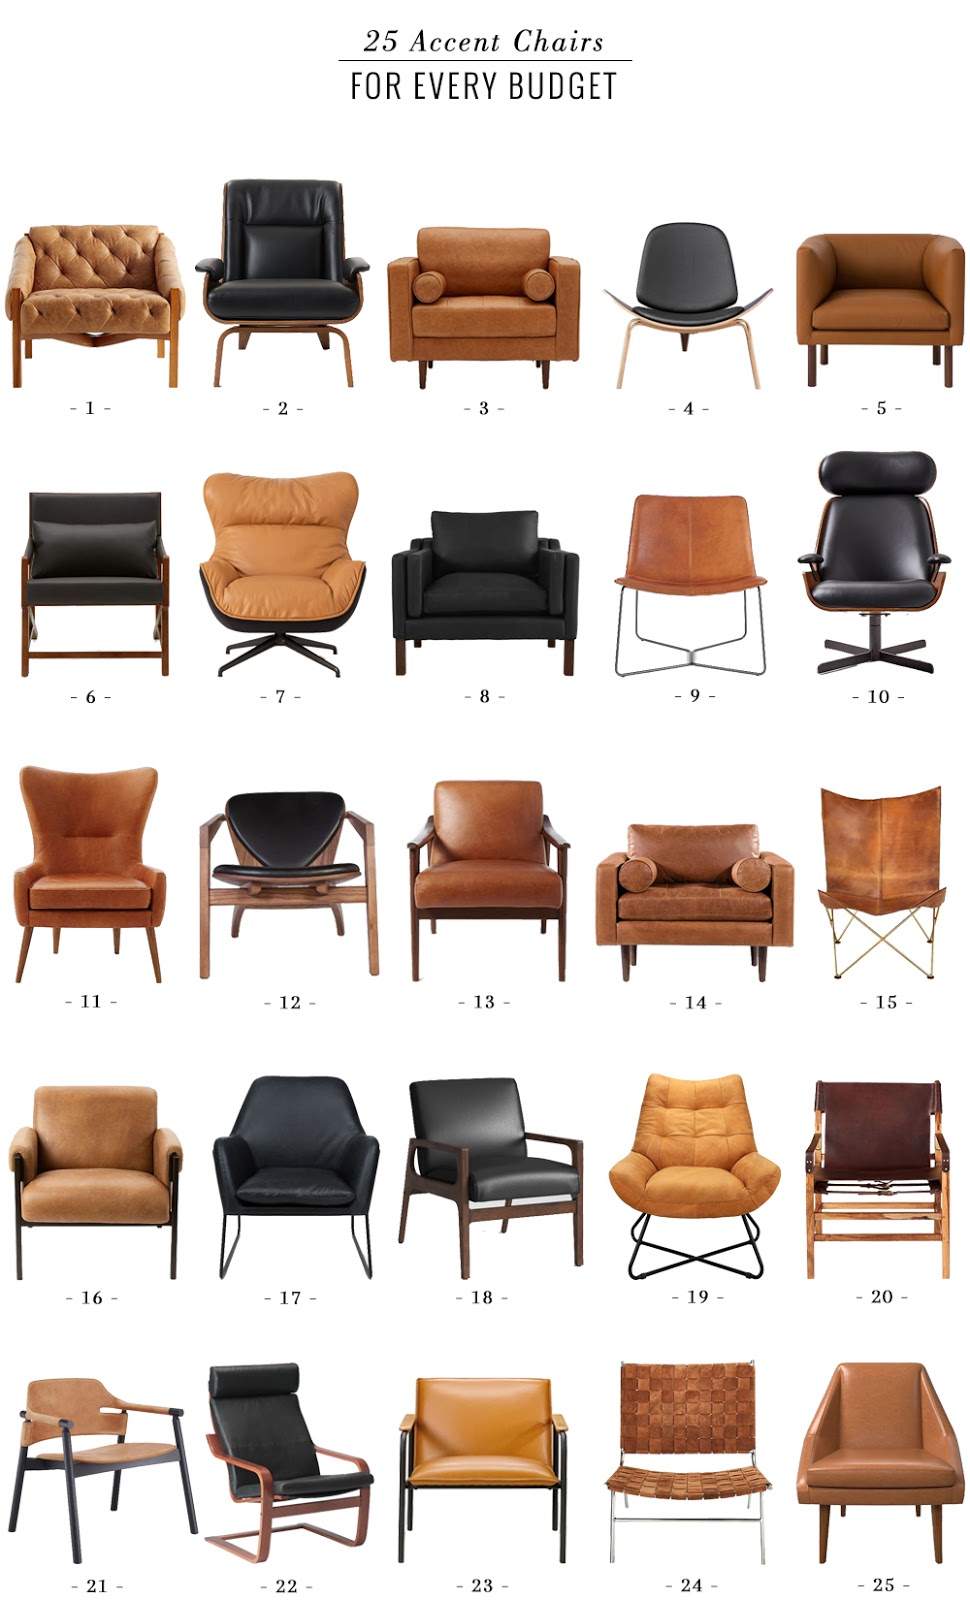 Decor Interiors 25 Accent Chairs For All Tastes And Budgets Gaby Burger